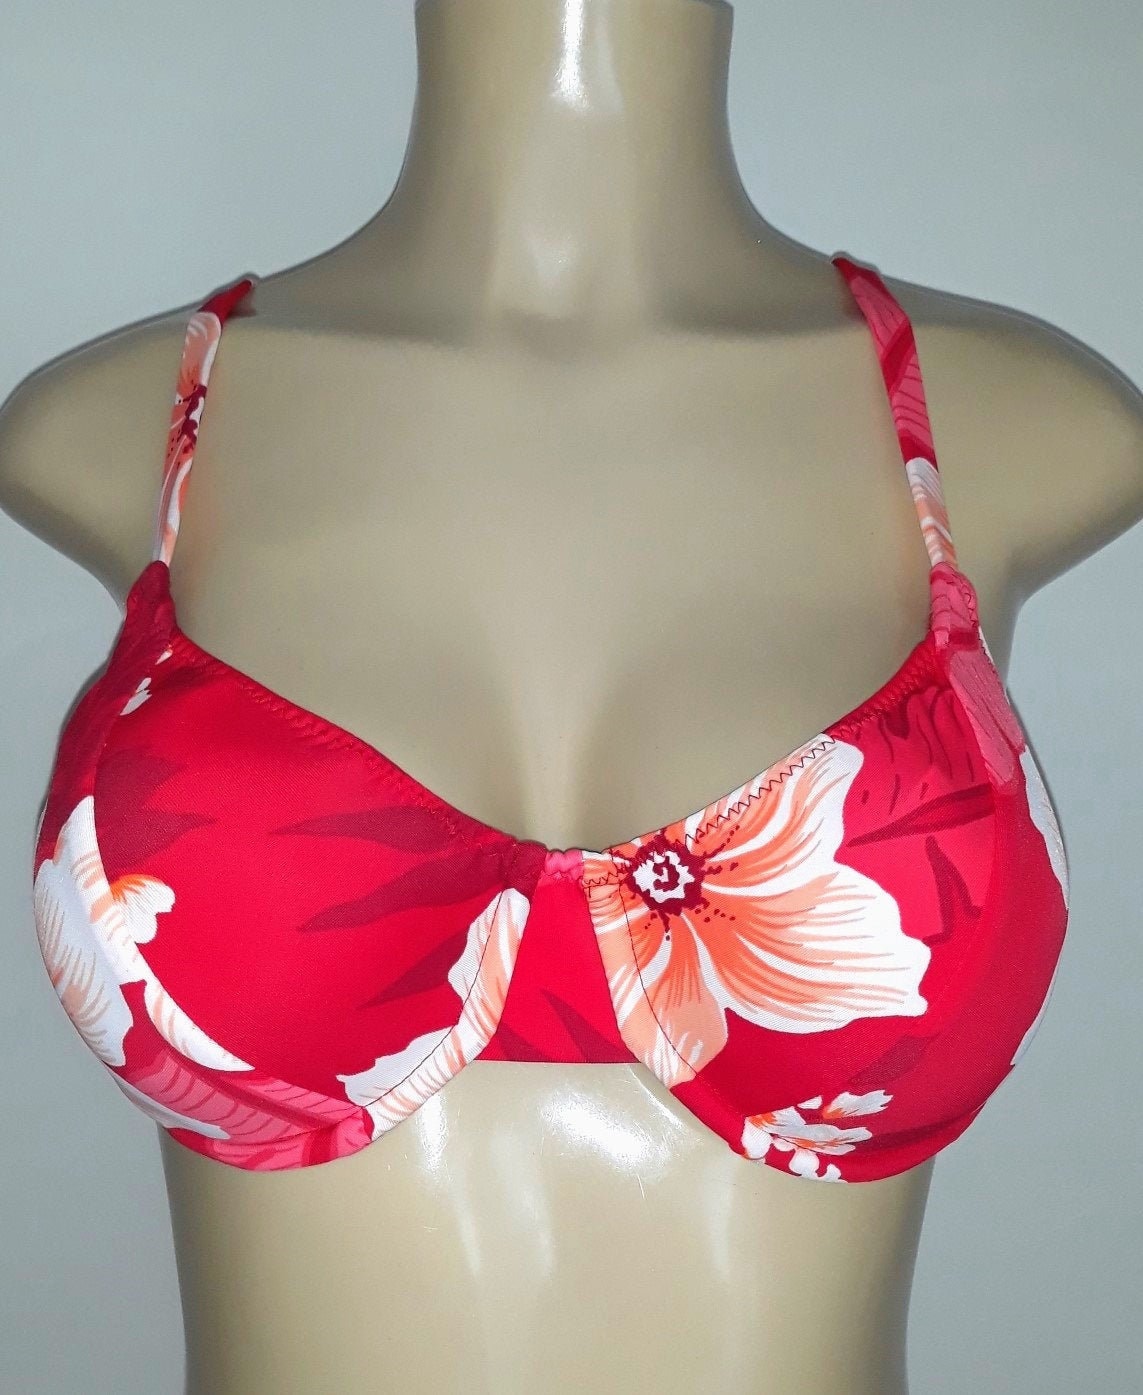 Bikini Tops for Bigger Busts Underwire Size Swimsuits Etsy